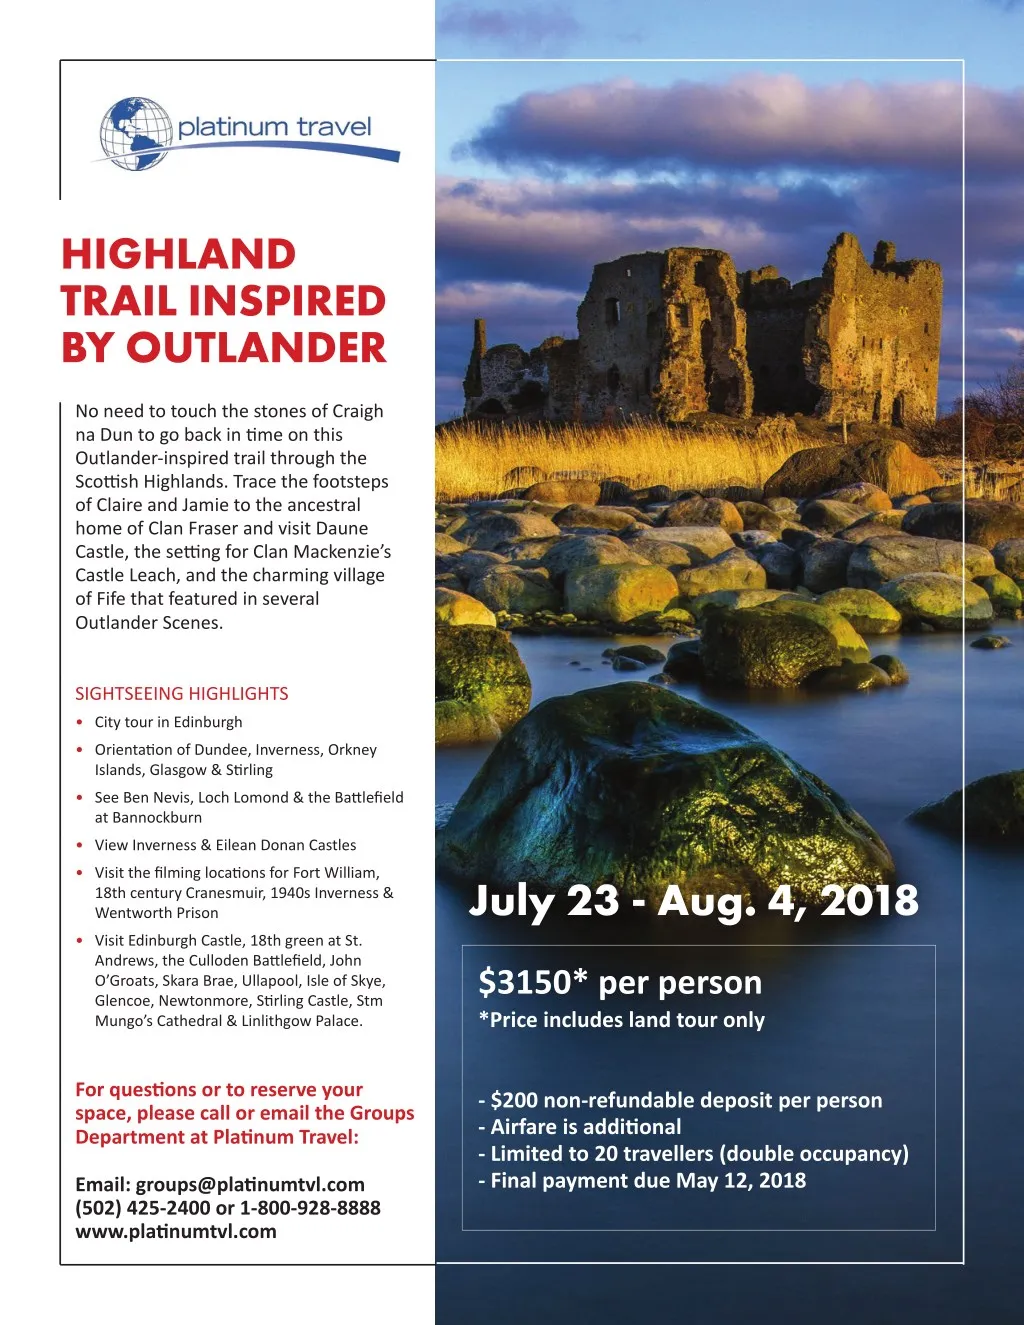 PPT - HIGHLAND TRAIL INSPIRED BY OUTLANDER PowerPoint Presentation ...